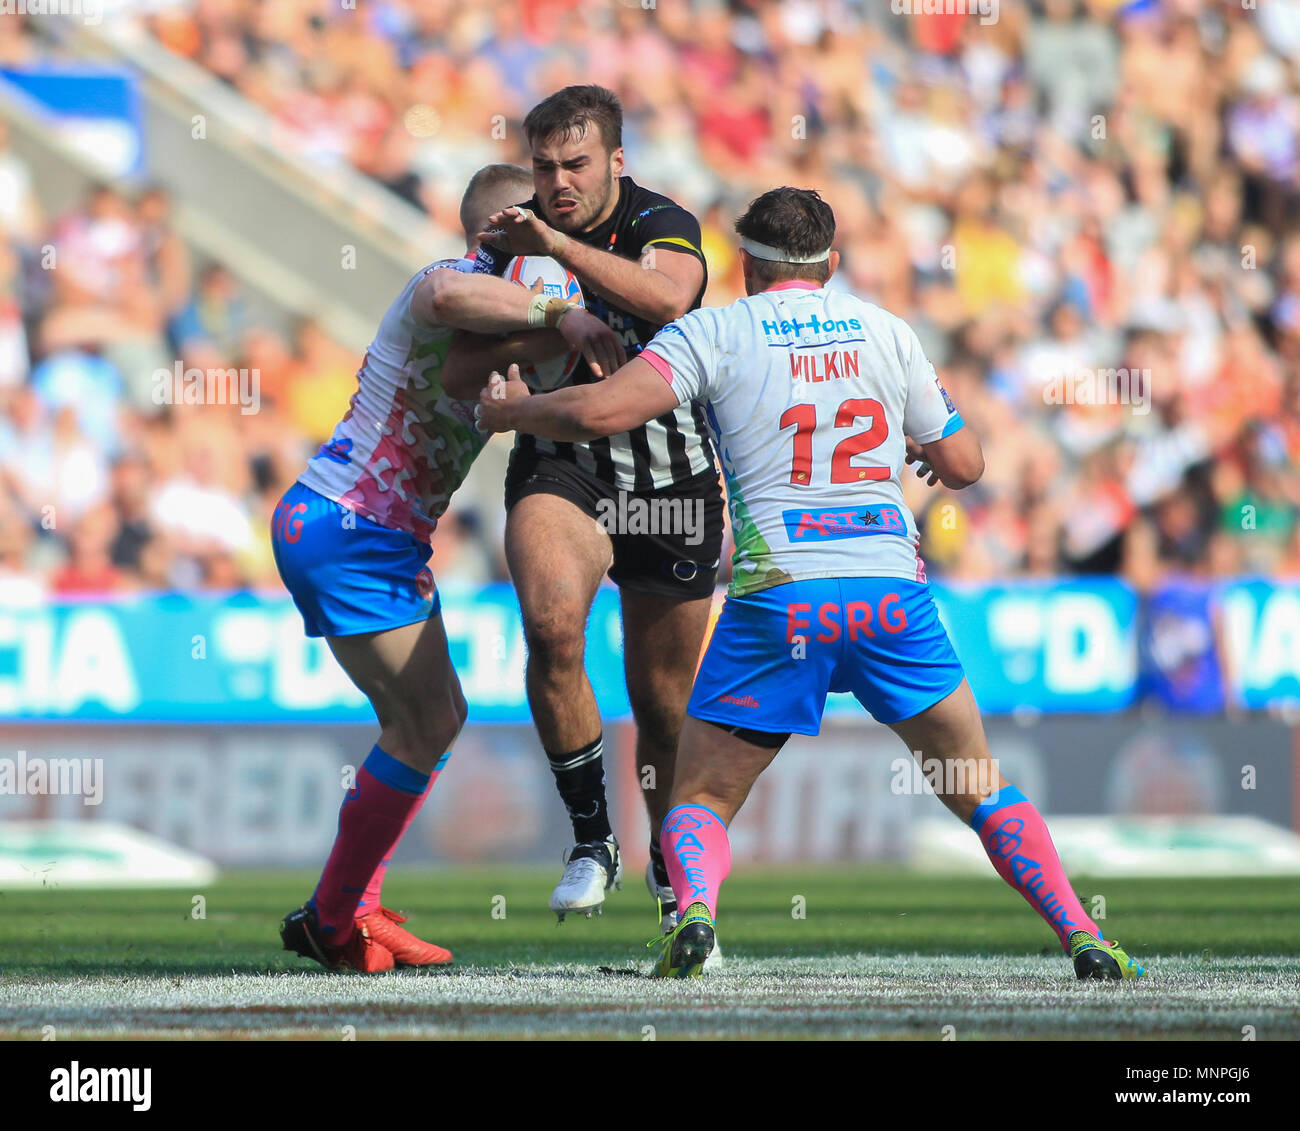 19th May 2018 , St. James' Park, Newcastle, England; Betfred Super League Magic Weekend, Widnes Vikings v St Helens; Danny Craven of Widnes Vikings on a charge Stock Photo